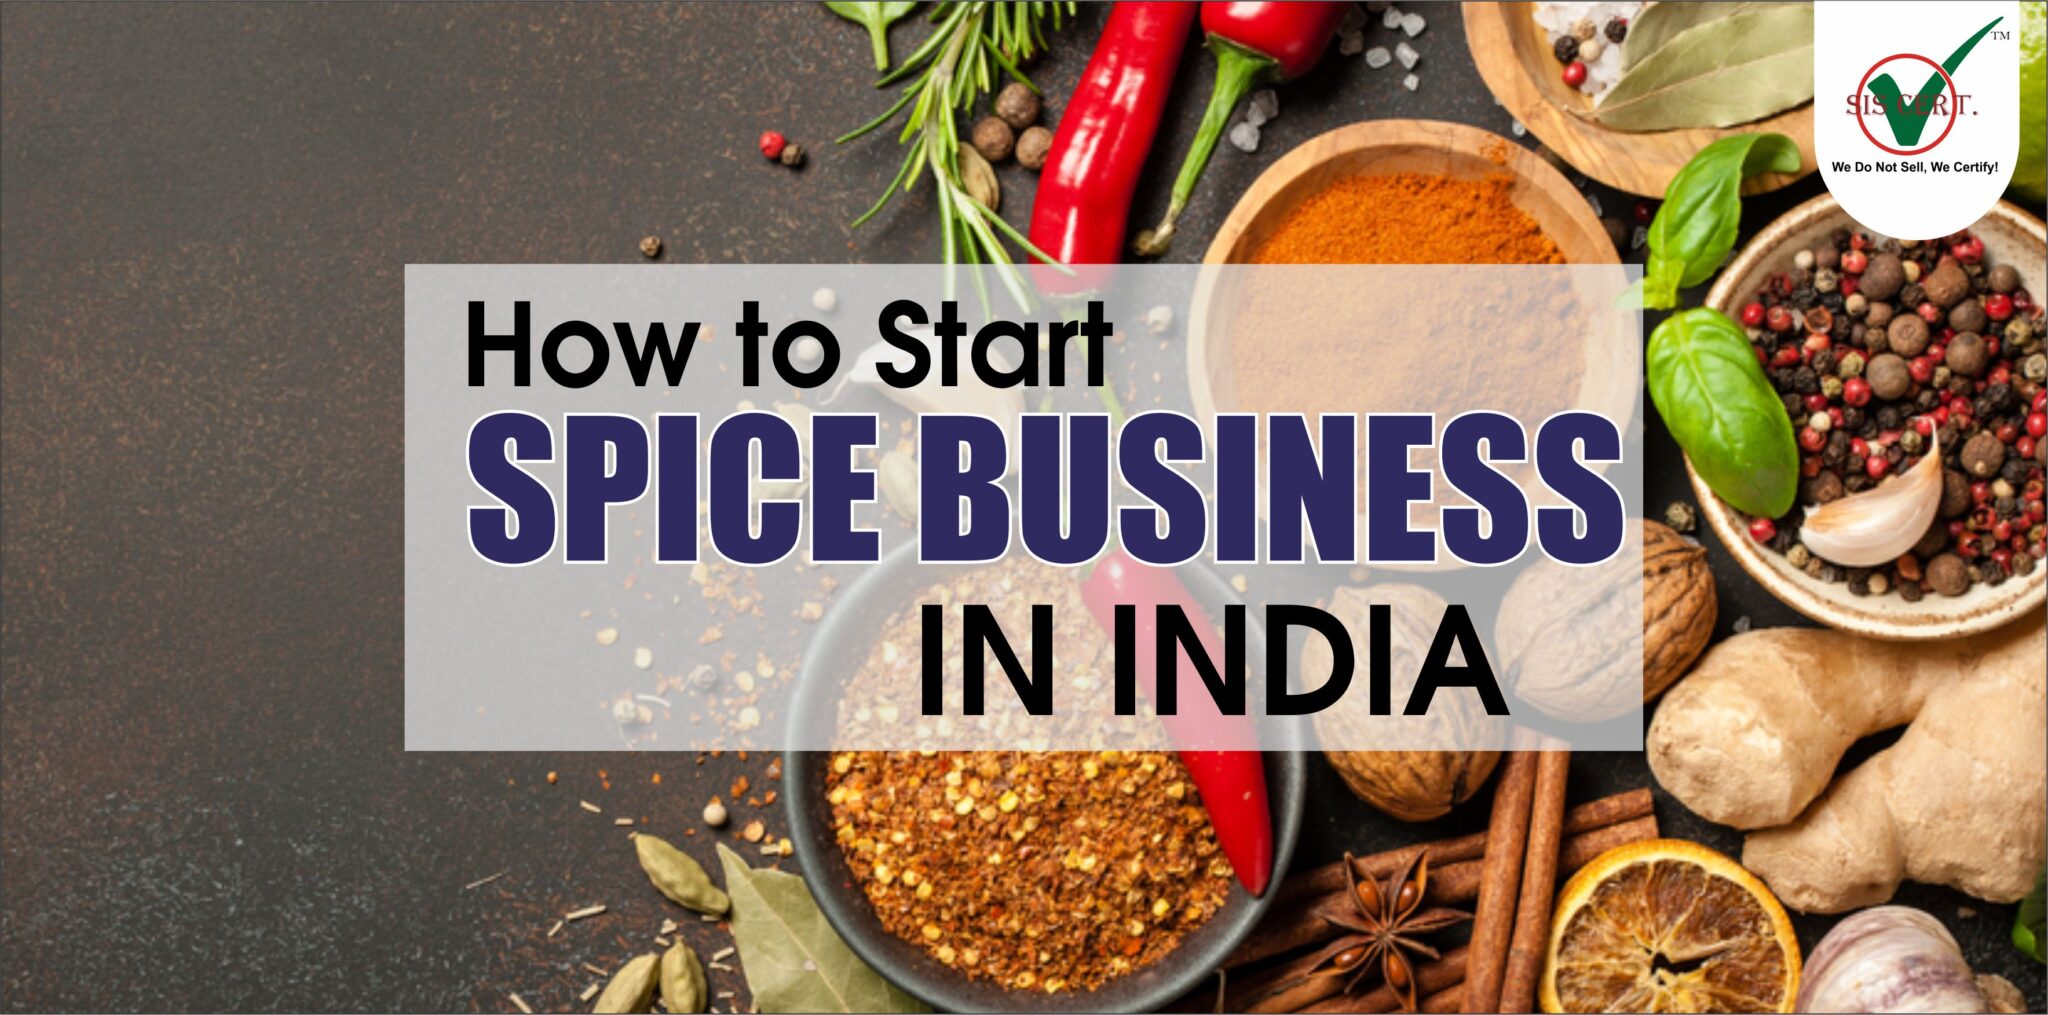 How-to-a-start-Spice-business-in-india-2-2048x1015